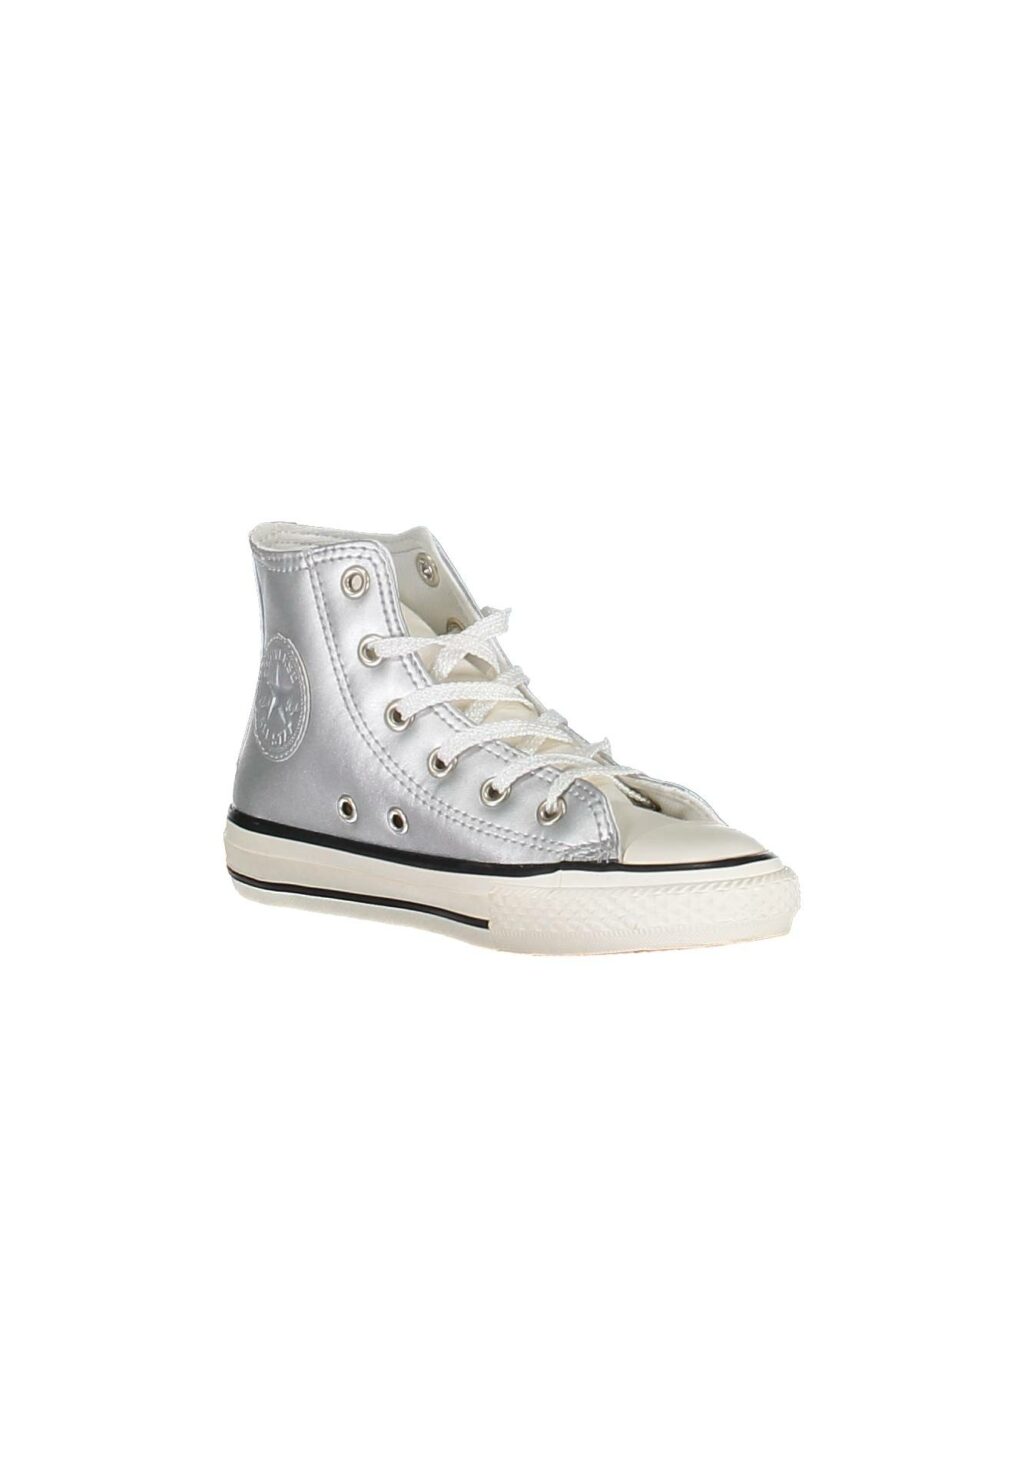 CONVERSE SPORTS SHOES FOR GIRLS SILVER 655127C_ARGENTO_SILVERSNOW-WHITEBLACK